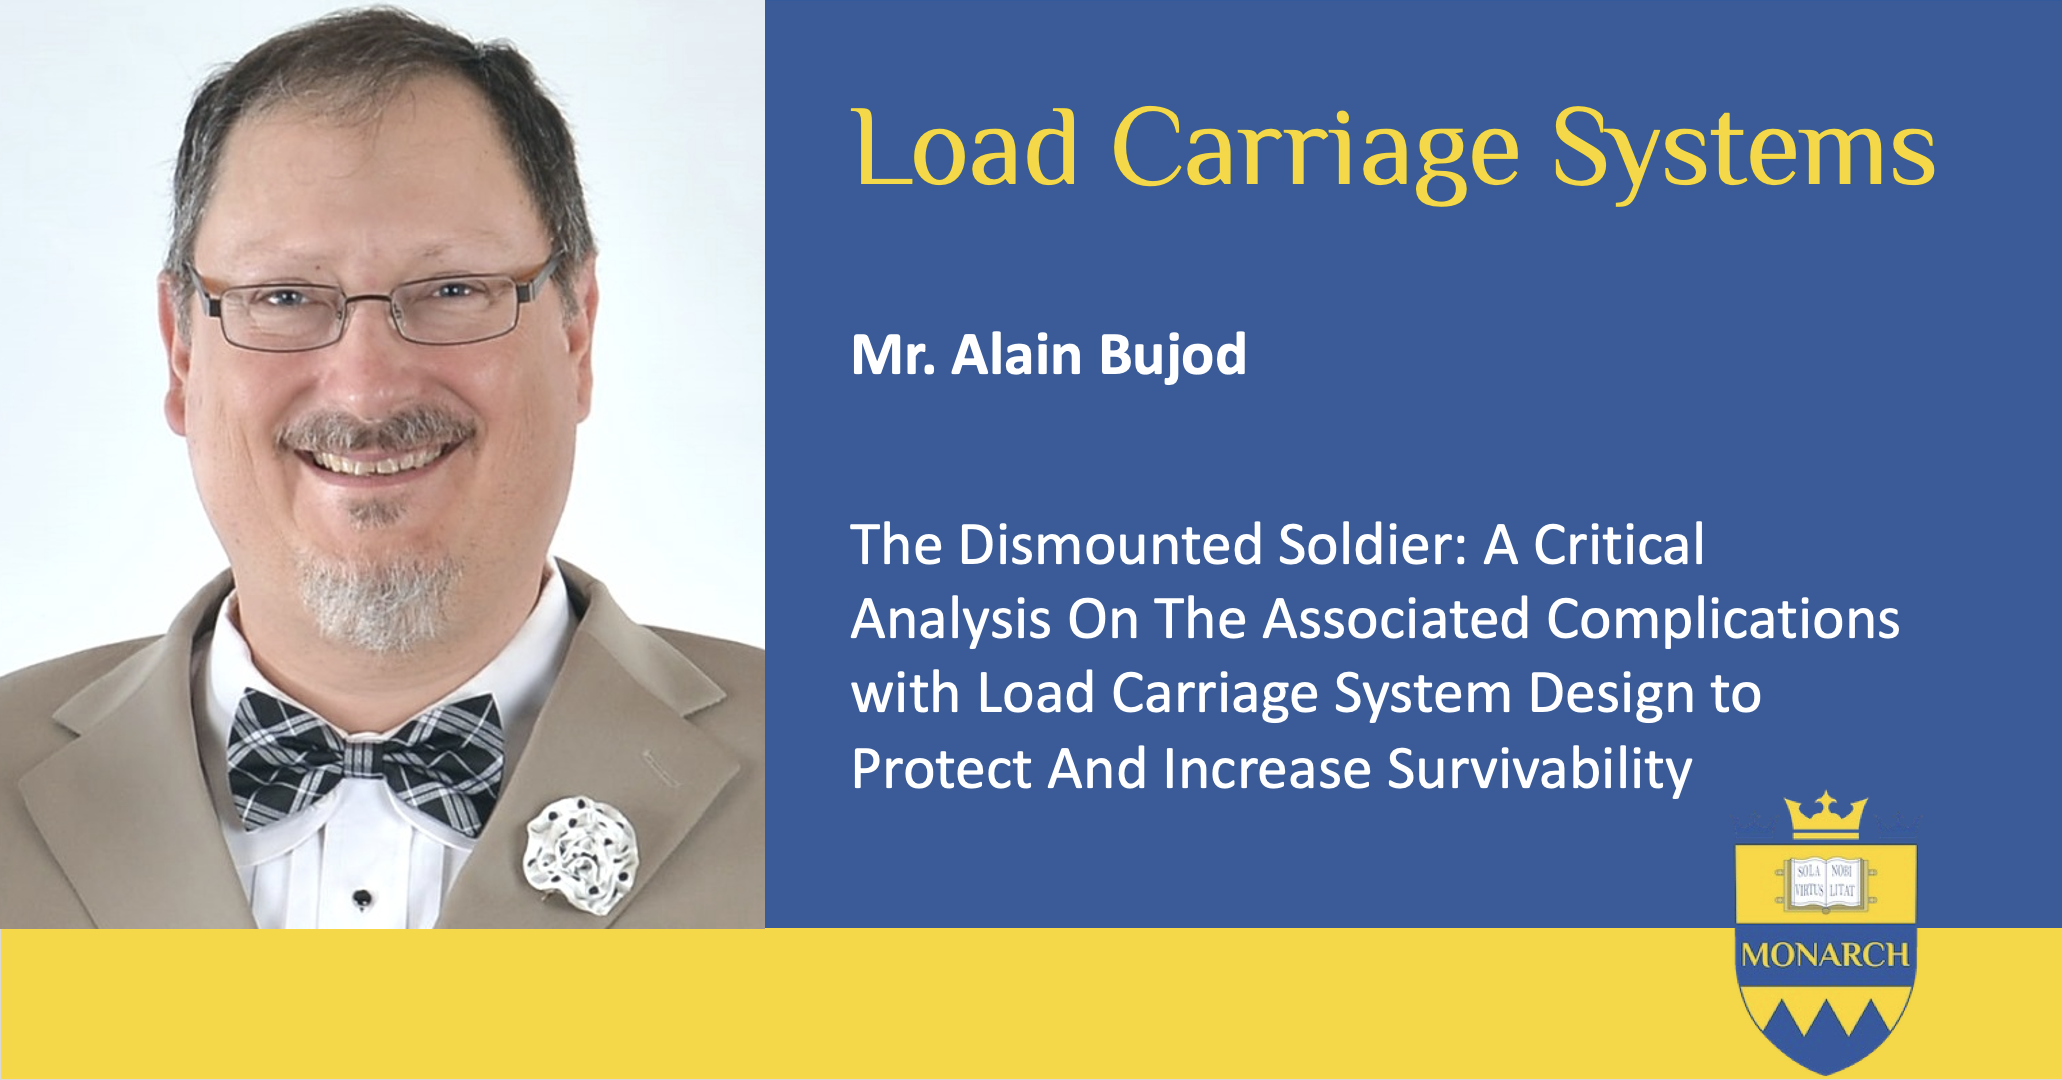 Dismounted Soldier: Load Carriage Systems